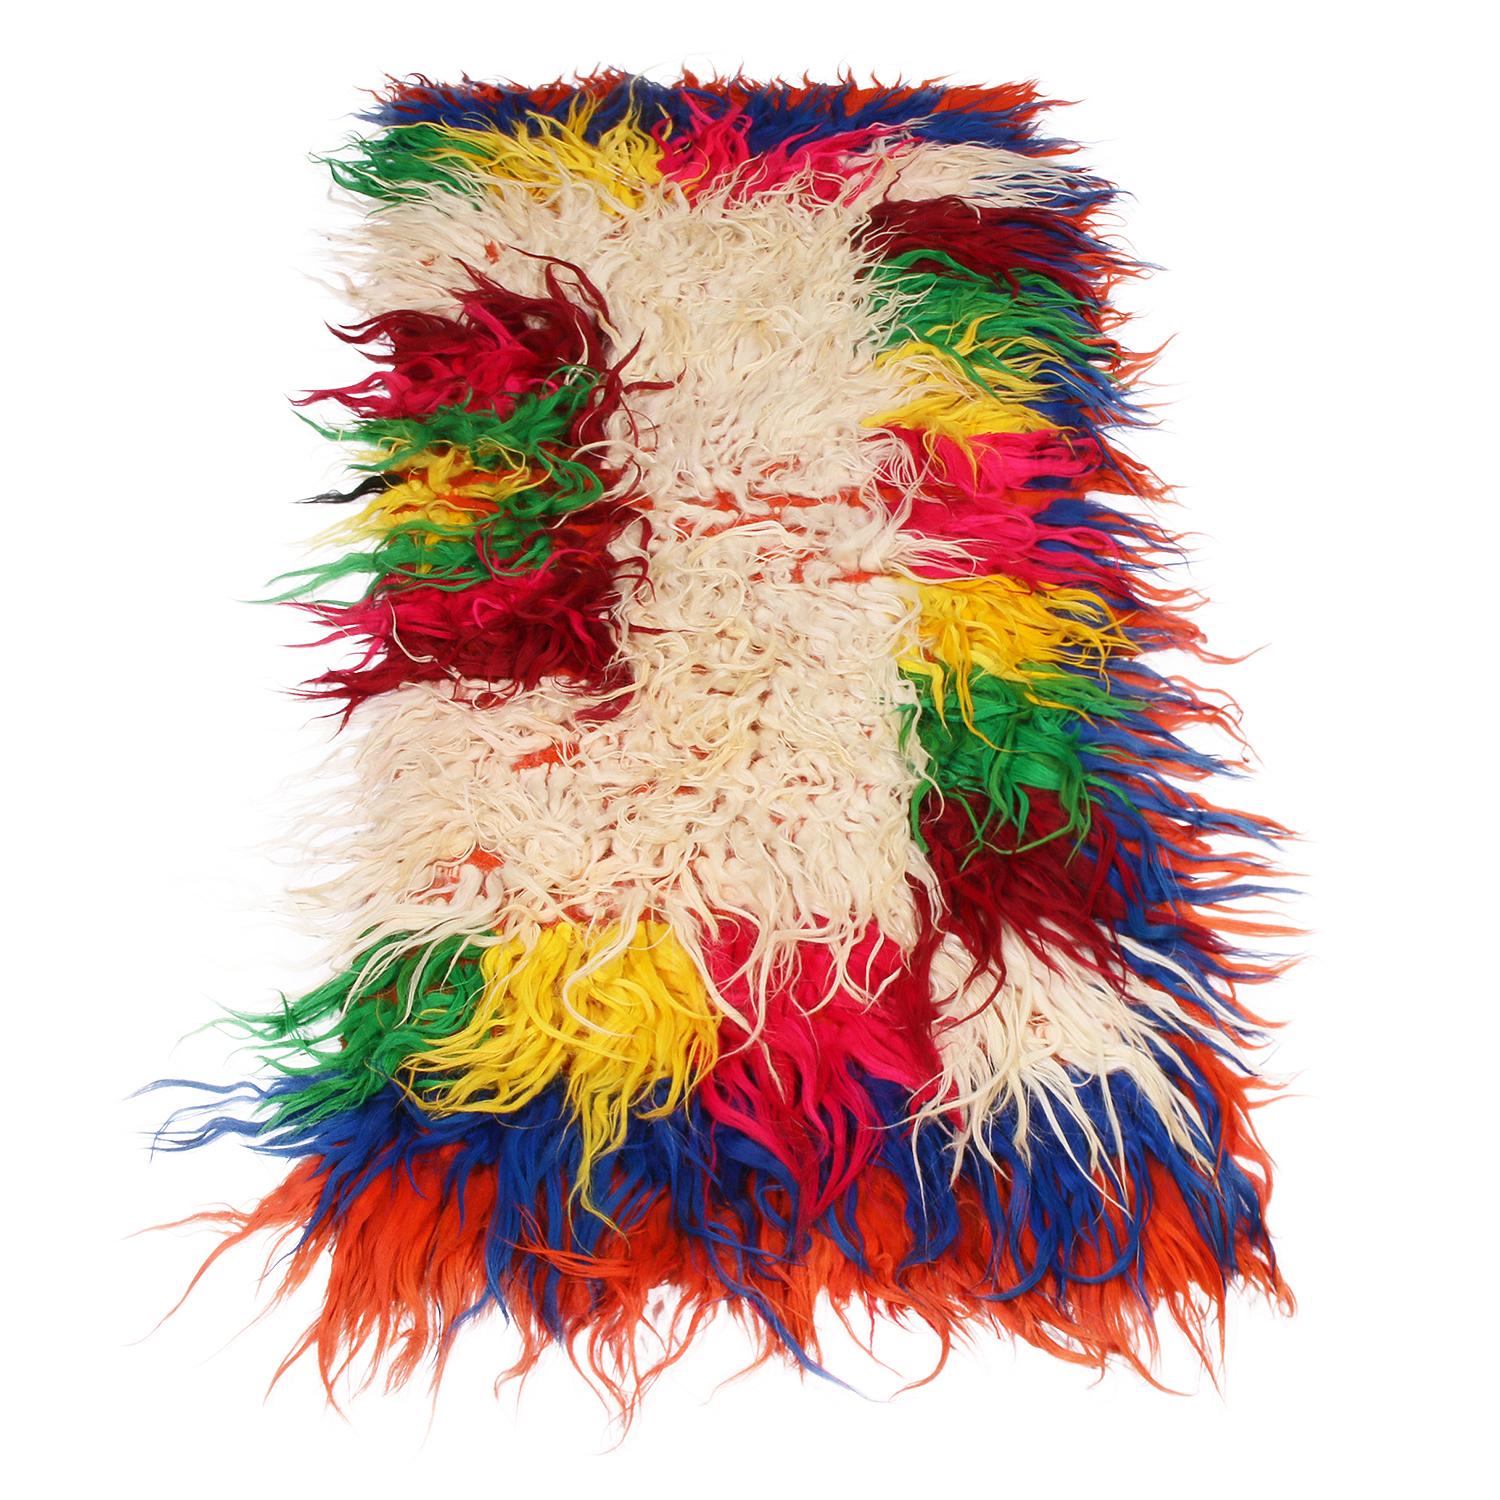 Hand knotted in Turkey originating between 1950-1960, this vintage midcentury Tulu rug enjoys the Classic shag wool pile texture its family is known for in a unique, vibrant array of red, green, yellow, pink, blue, off-white, and orange hues for a